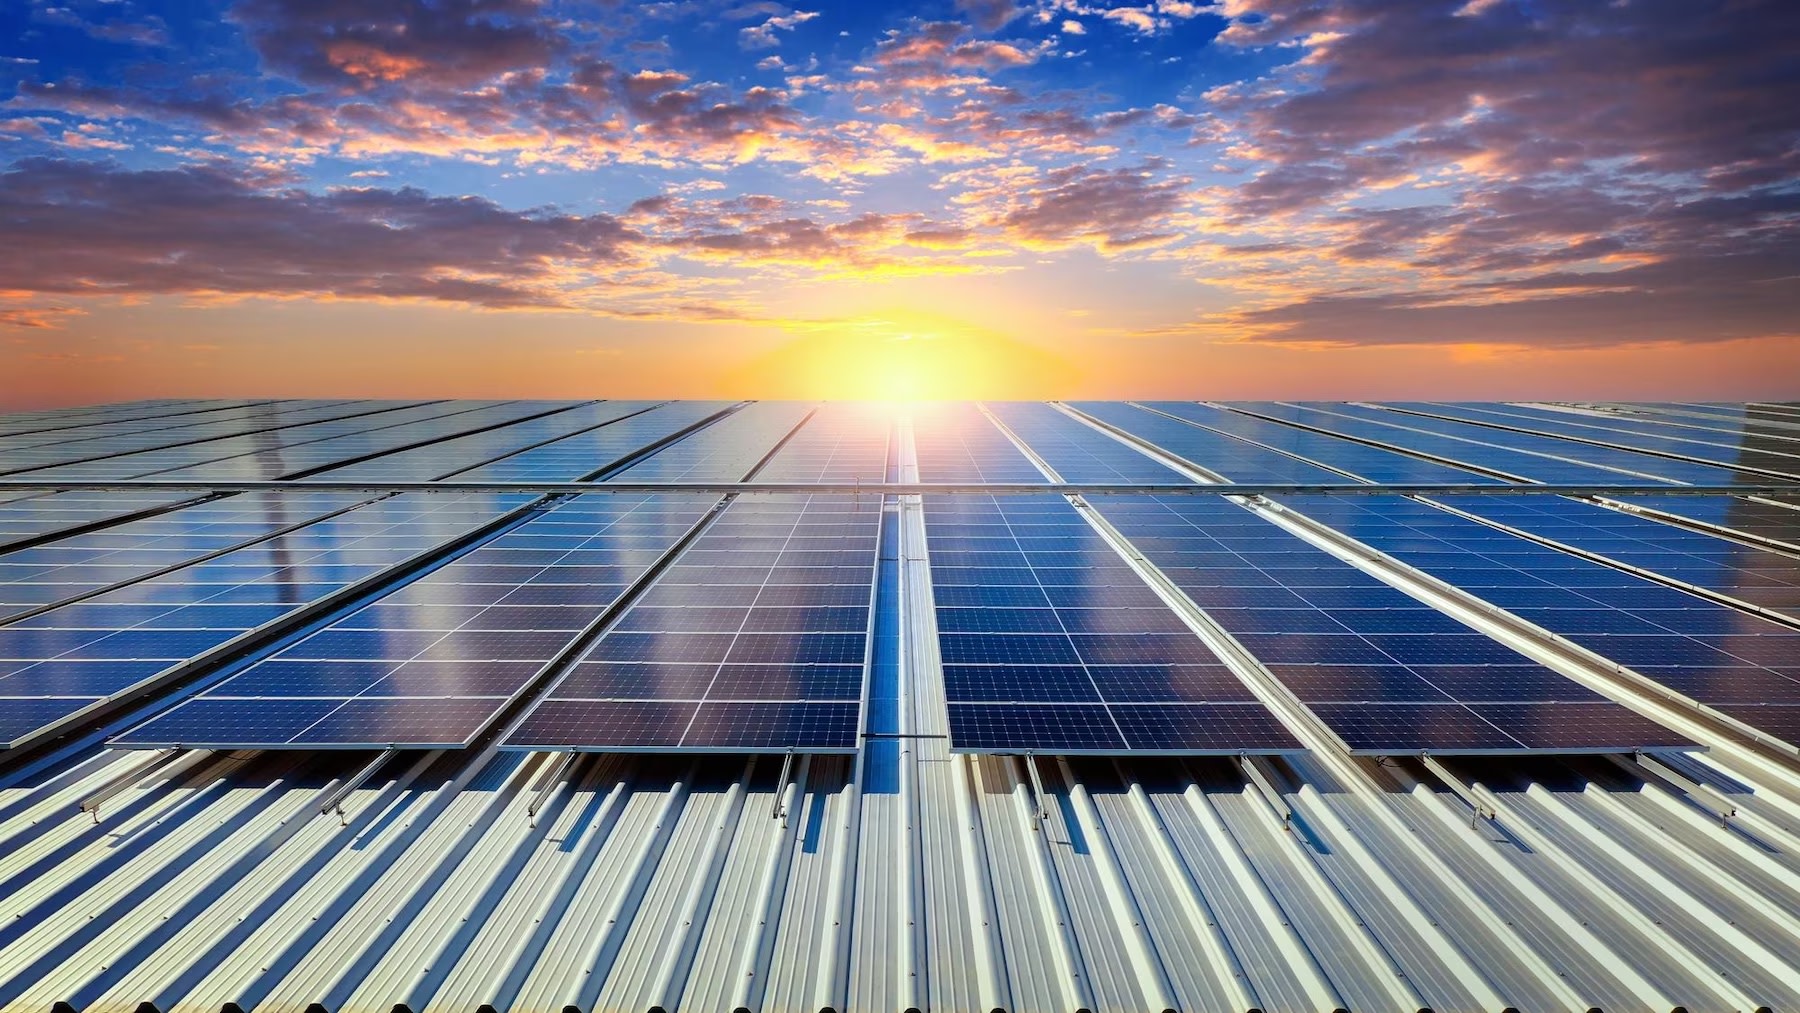 Image of solar PV panels on rooftop with background of clouds and sunset